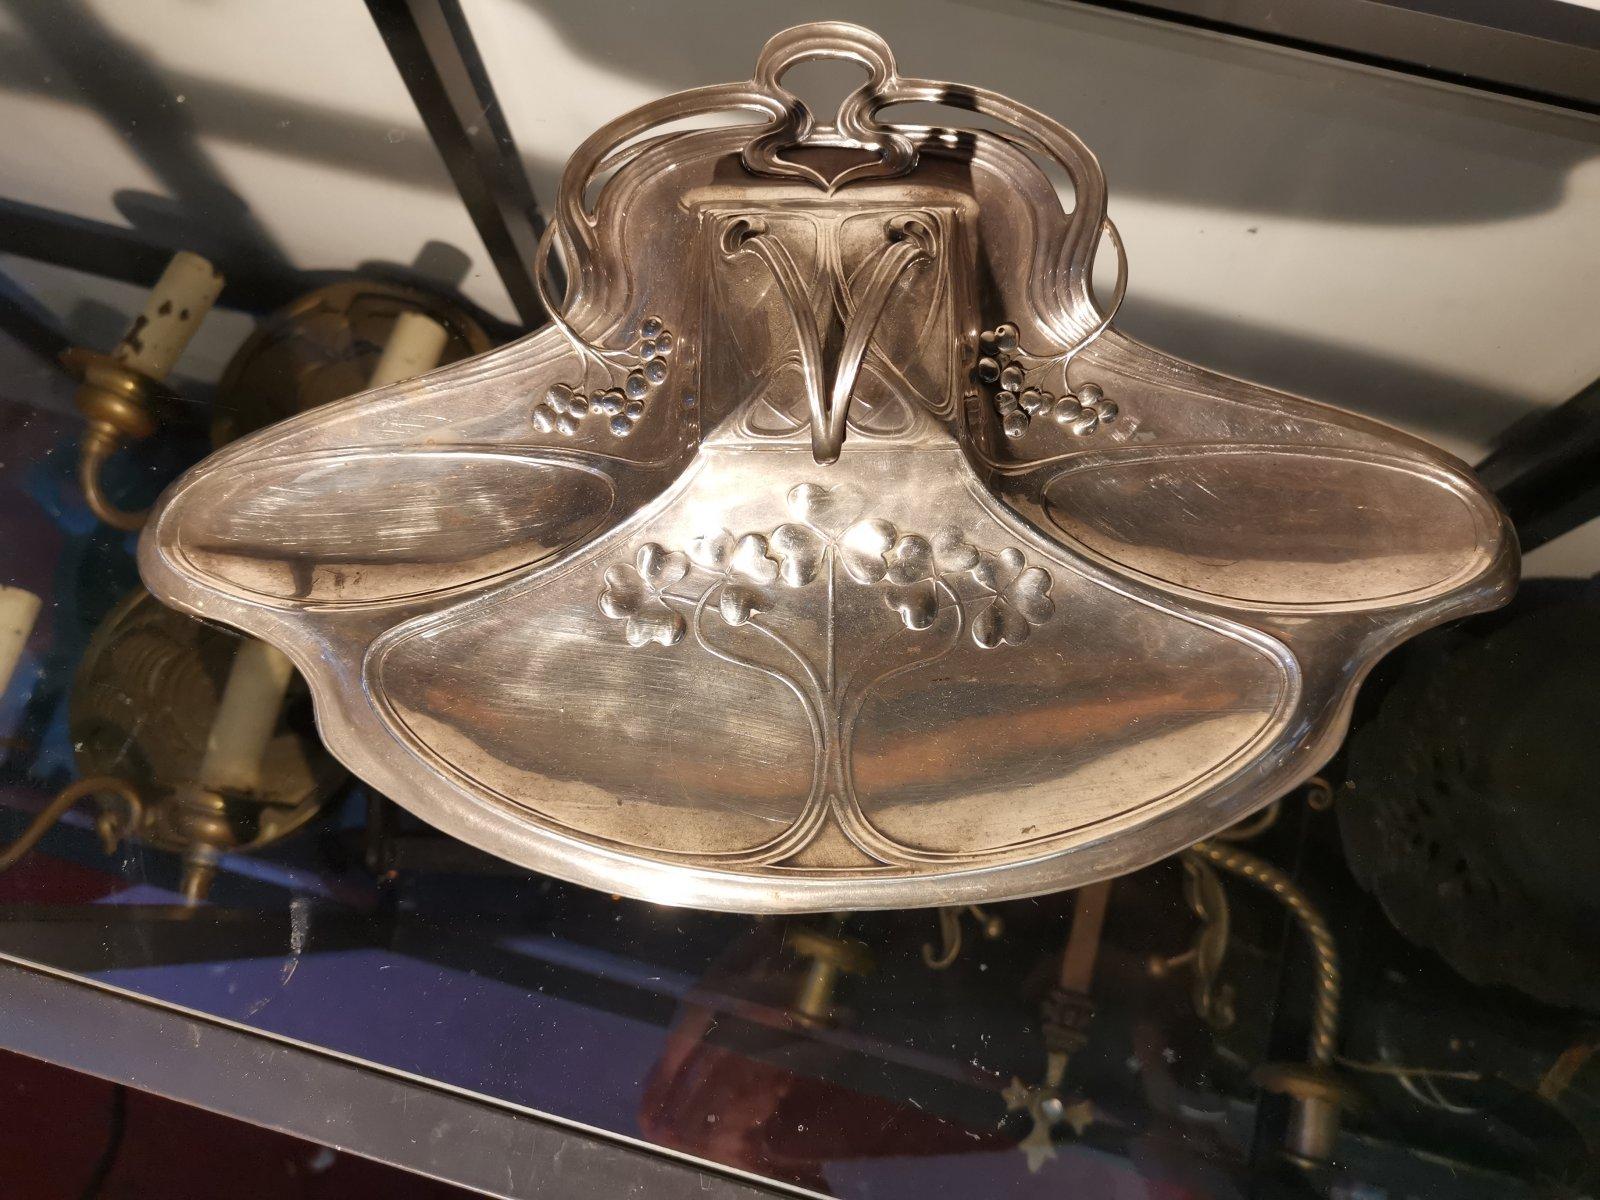 WMF. Secessionist Art Nouveau Pewter Inkstand. Germany.
The inkstand is of rectangular organic form with stylized clovers to the front border, plain deep welled front and smaller side sections, the raised inkwell section with a hinged stylized